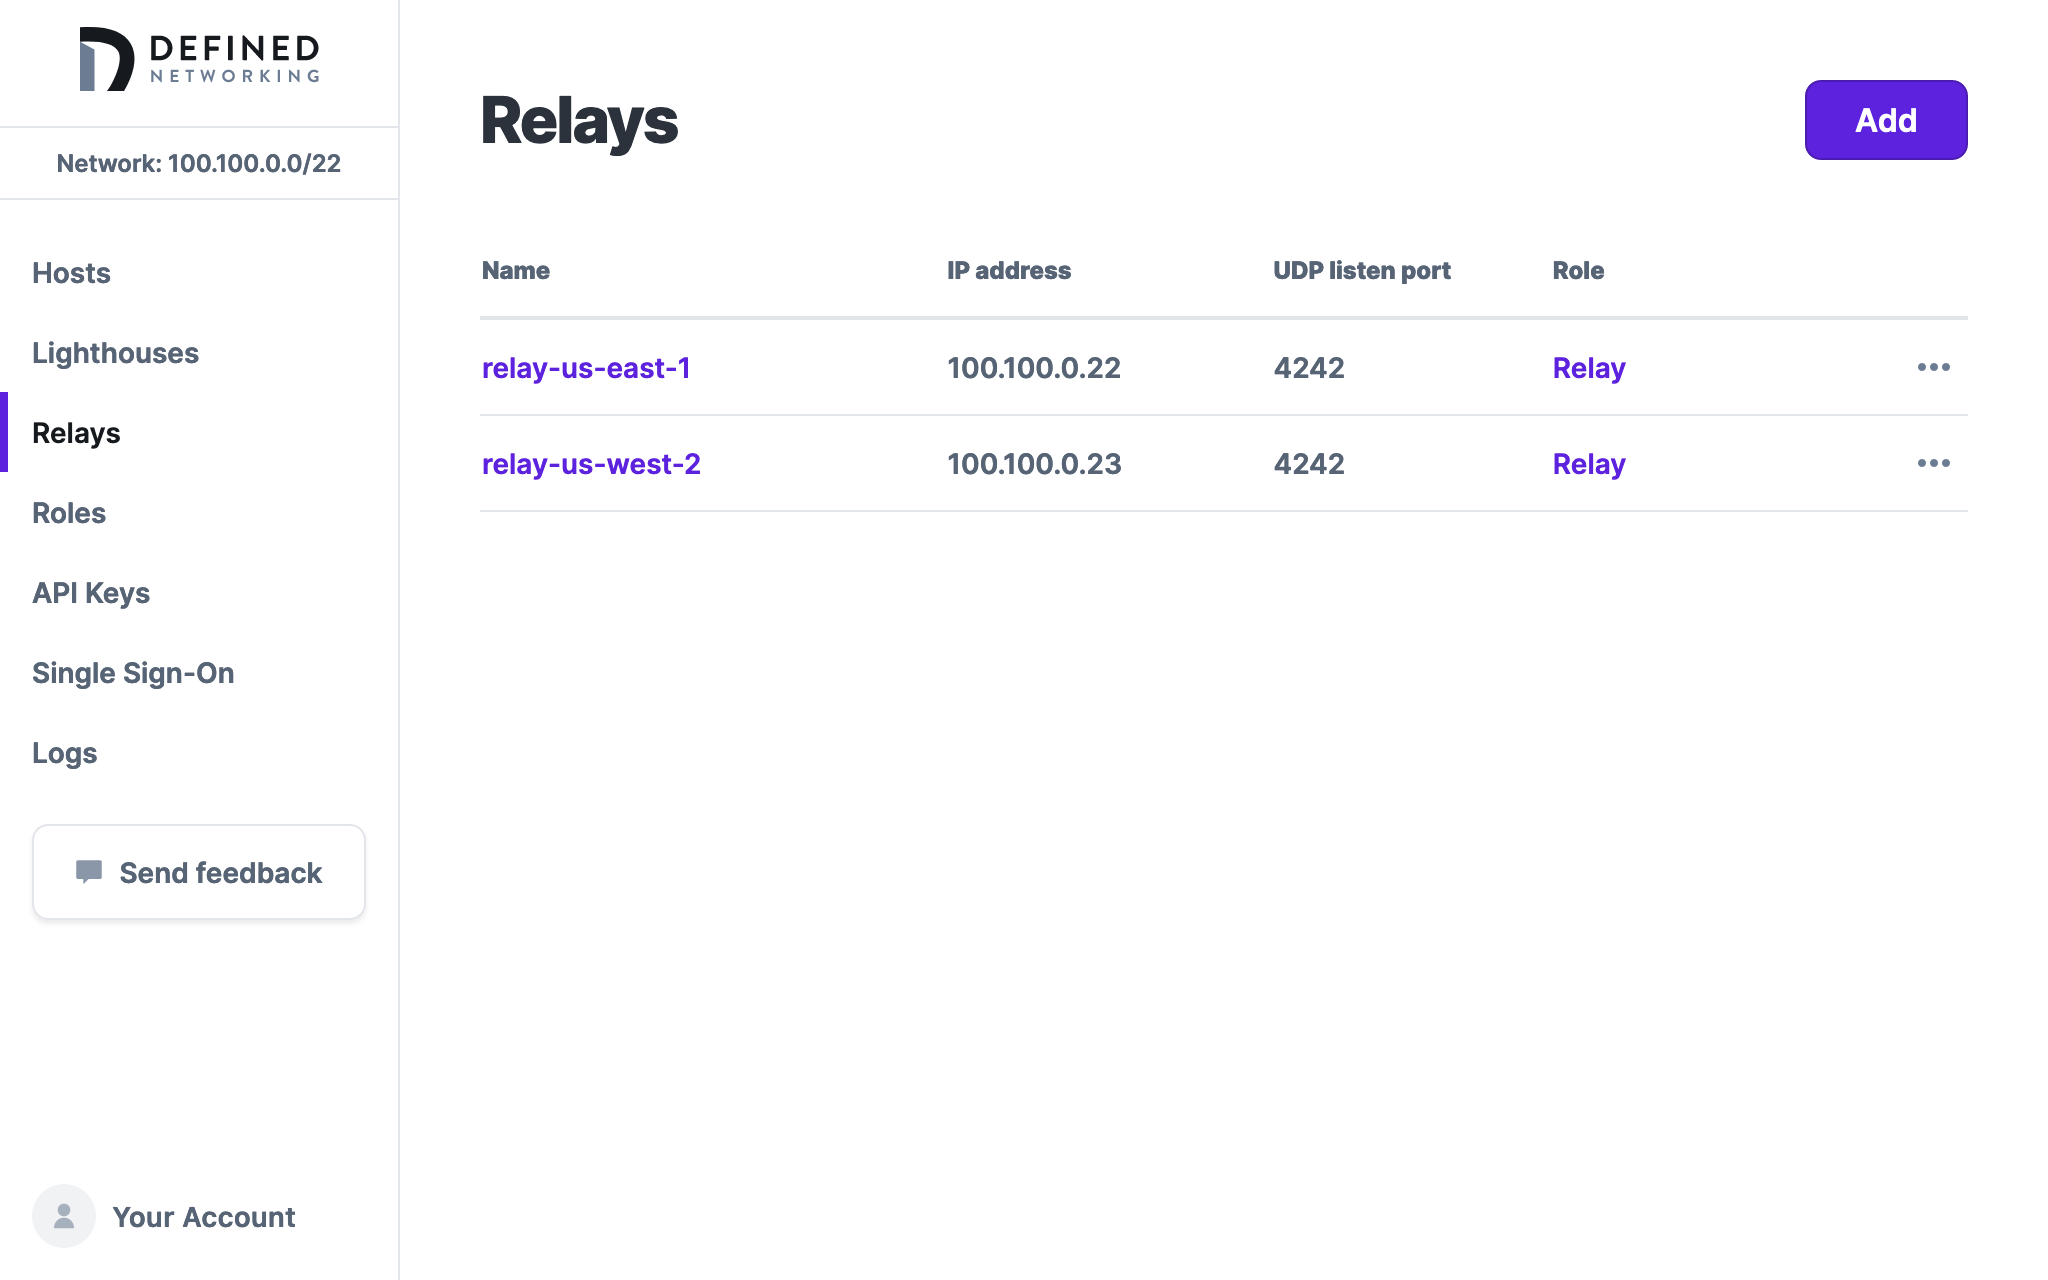 Relays page that shows one relay named `relay-us-east-1` and another named `relay-us-west-2`